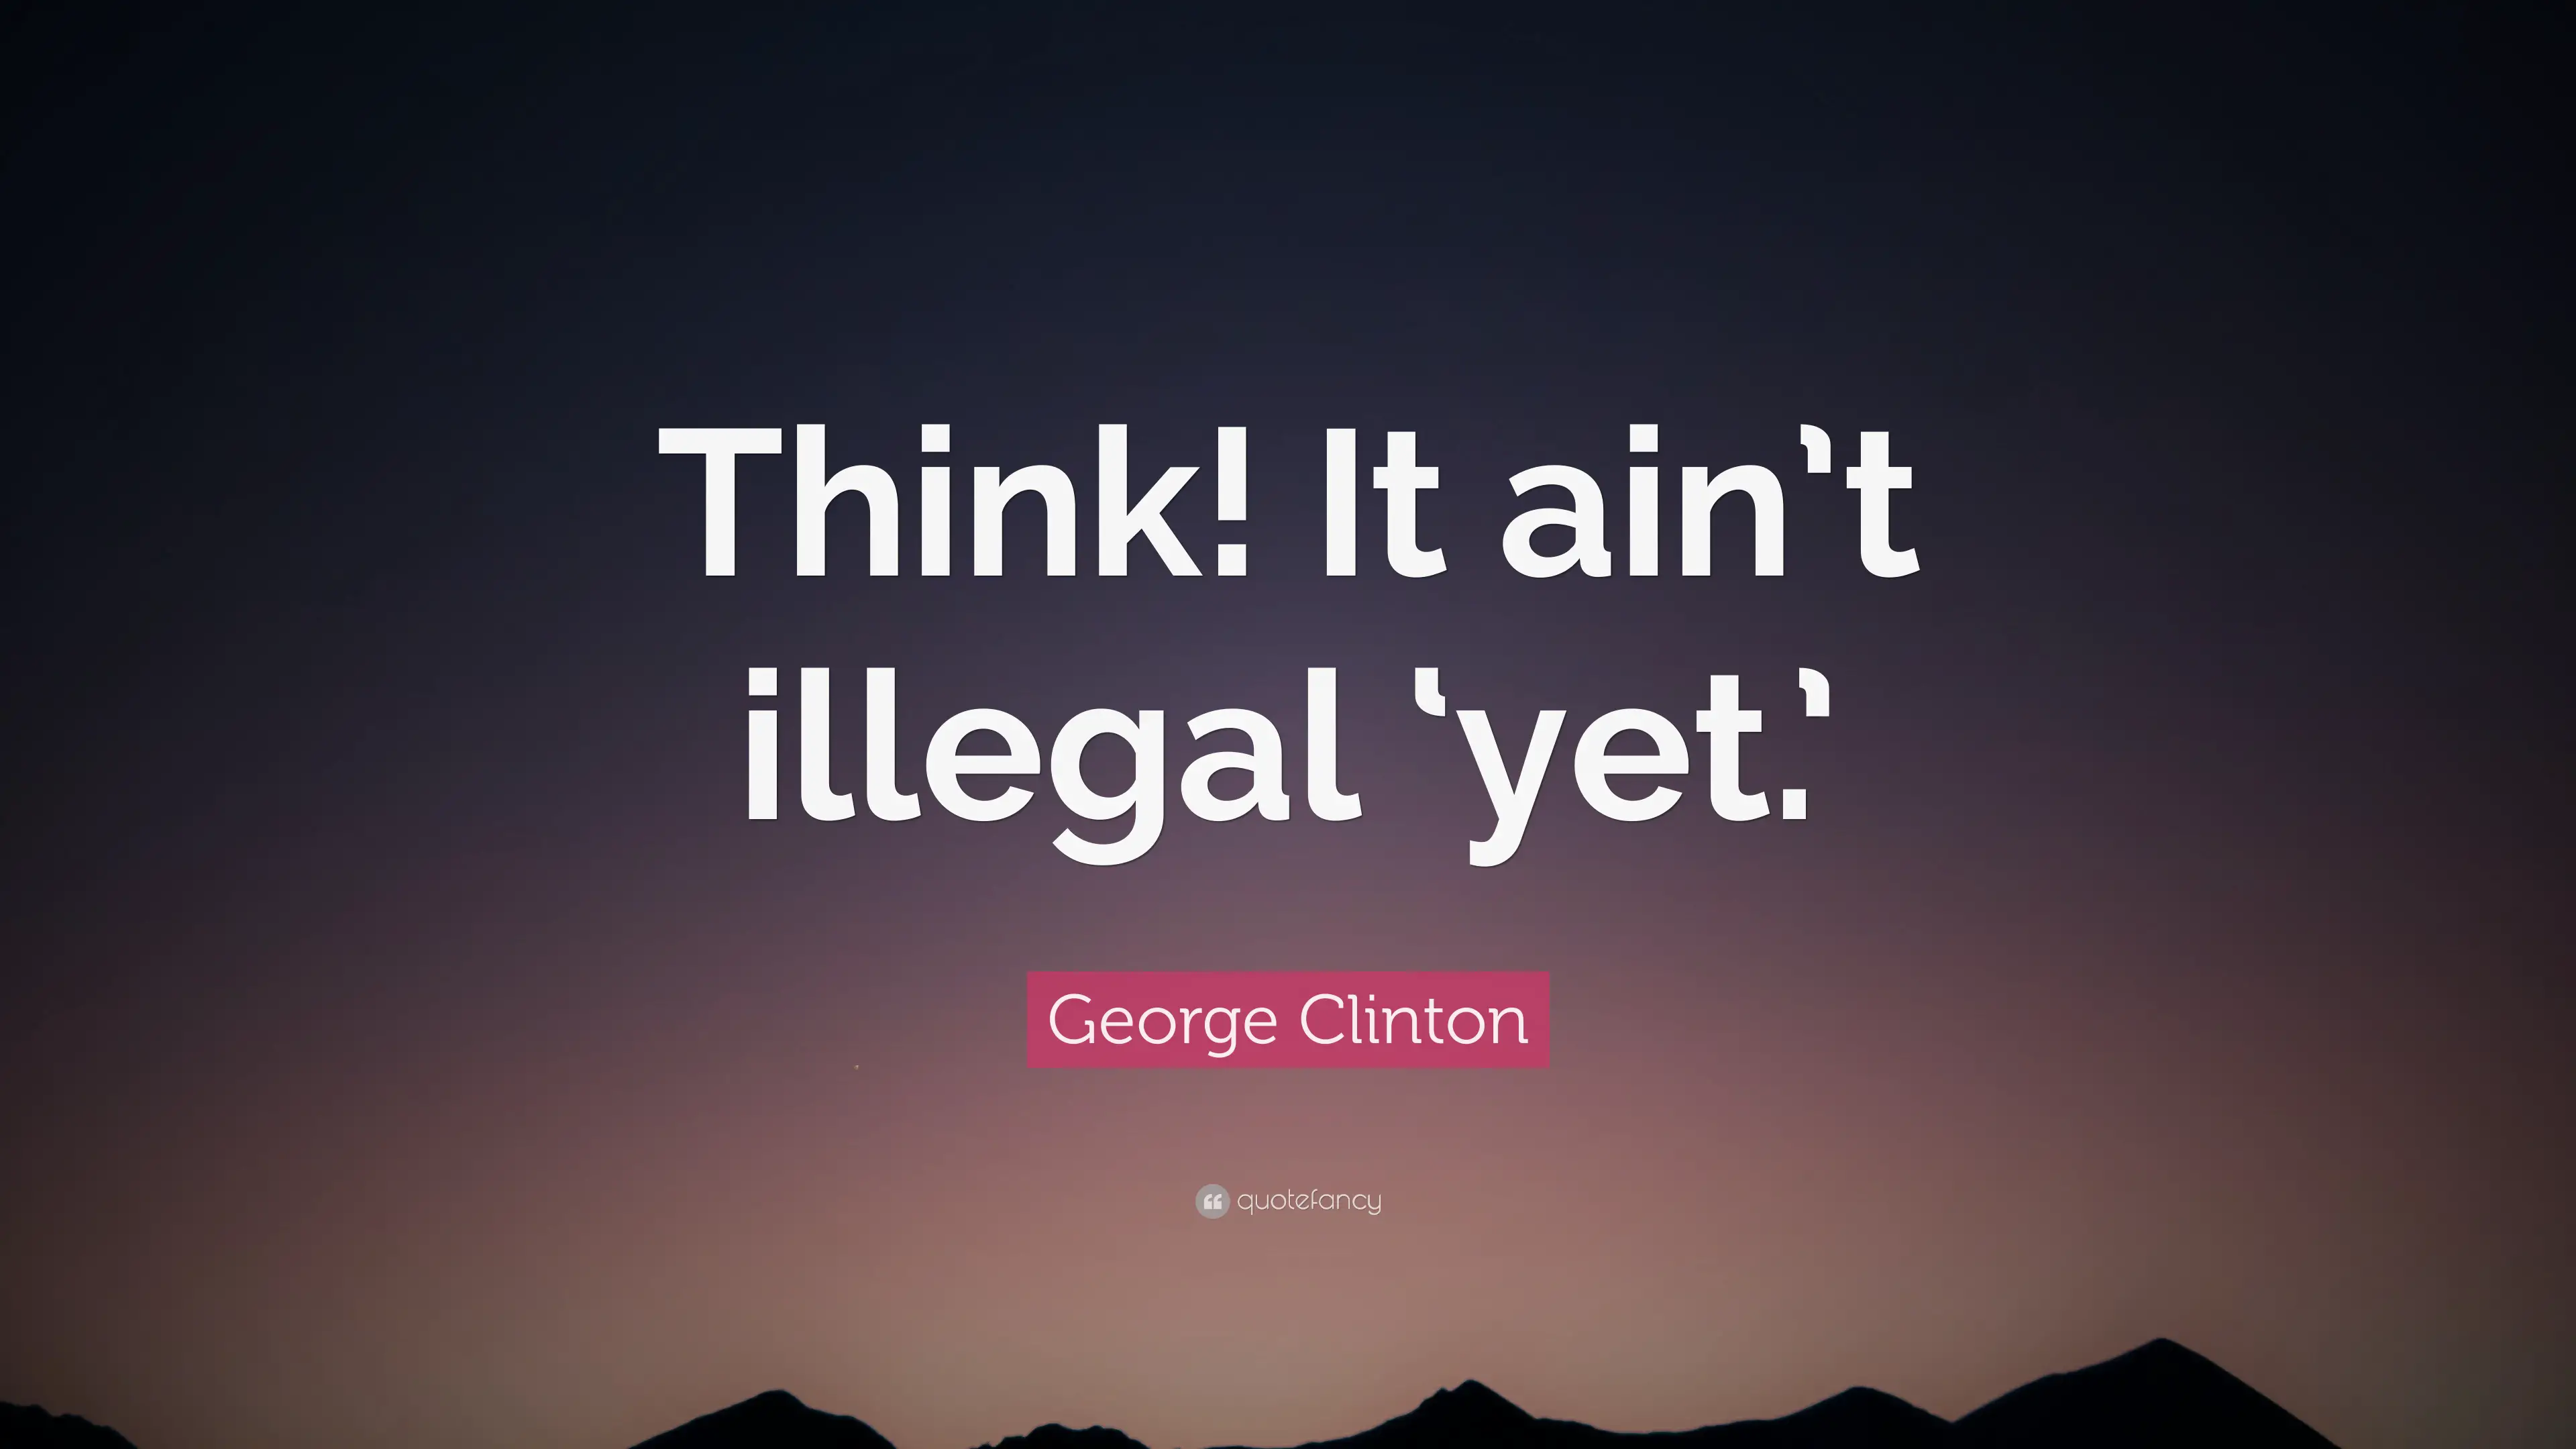 10 Best George Clinton Quotes